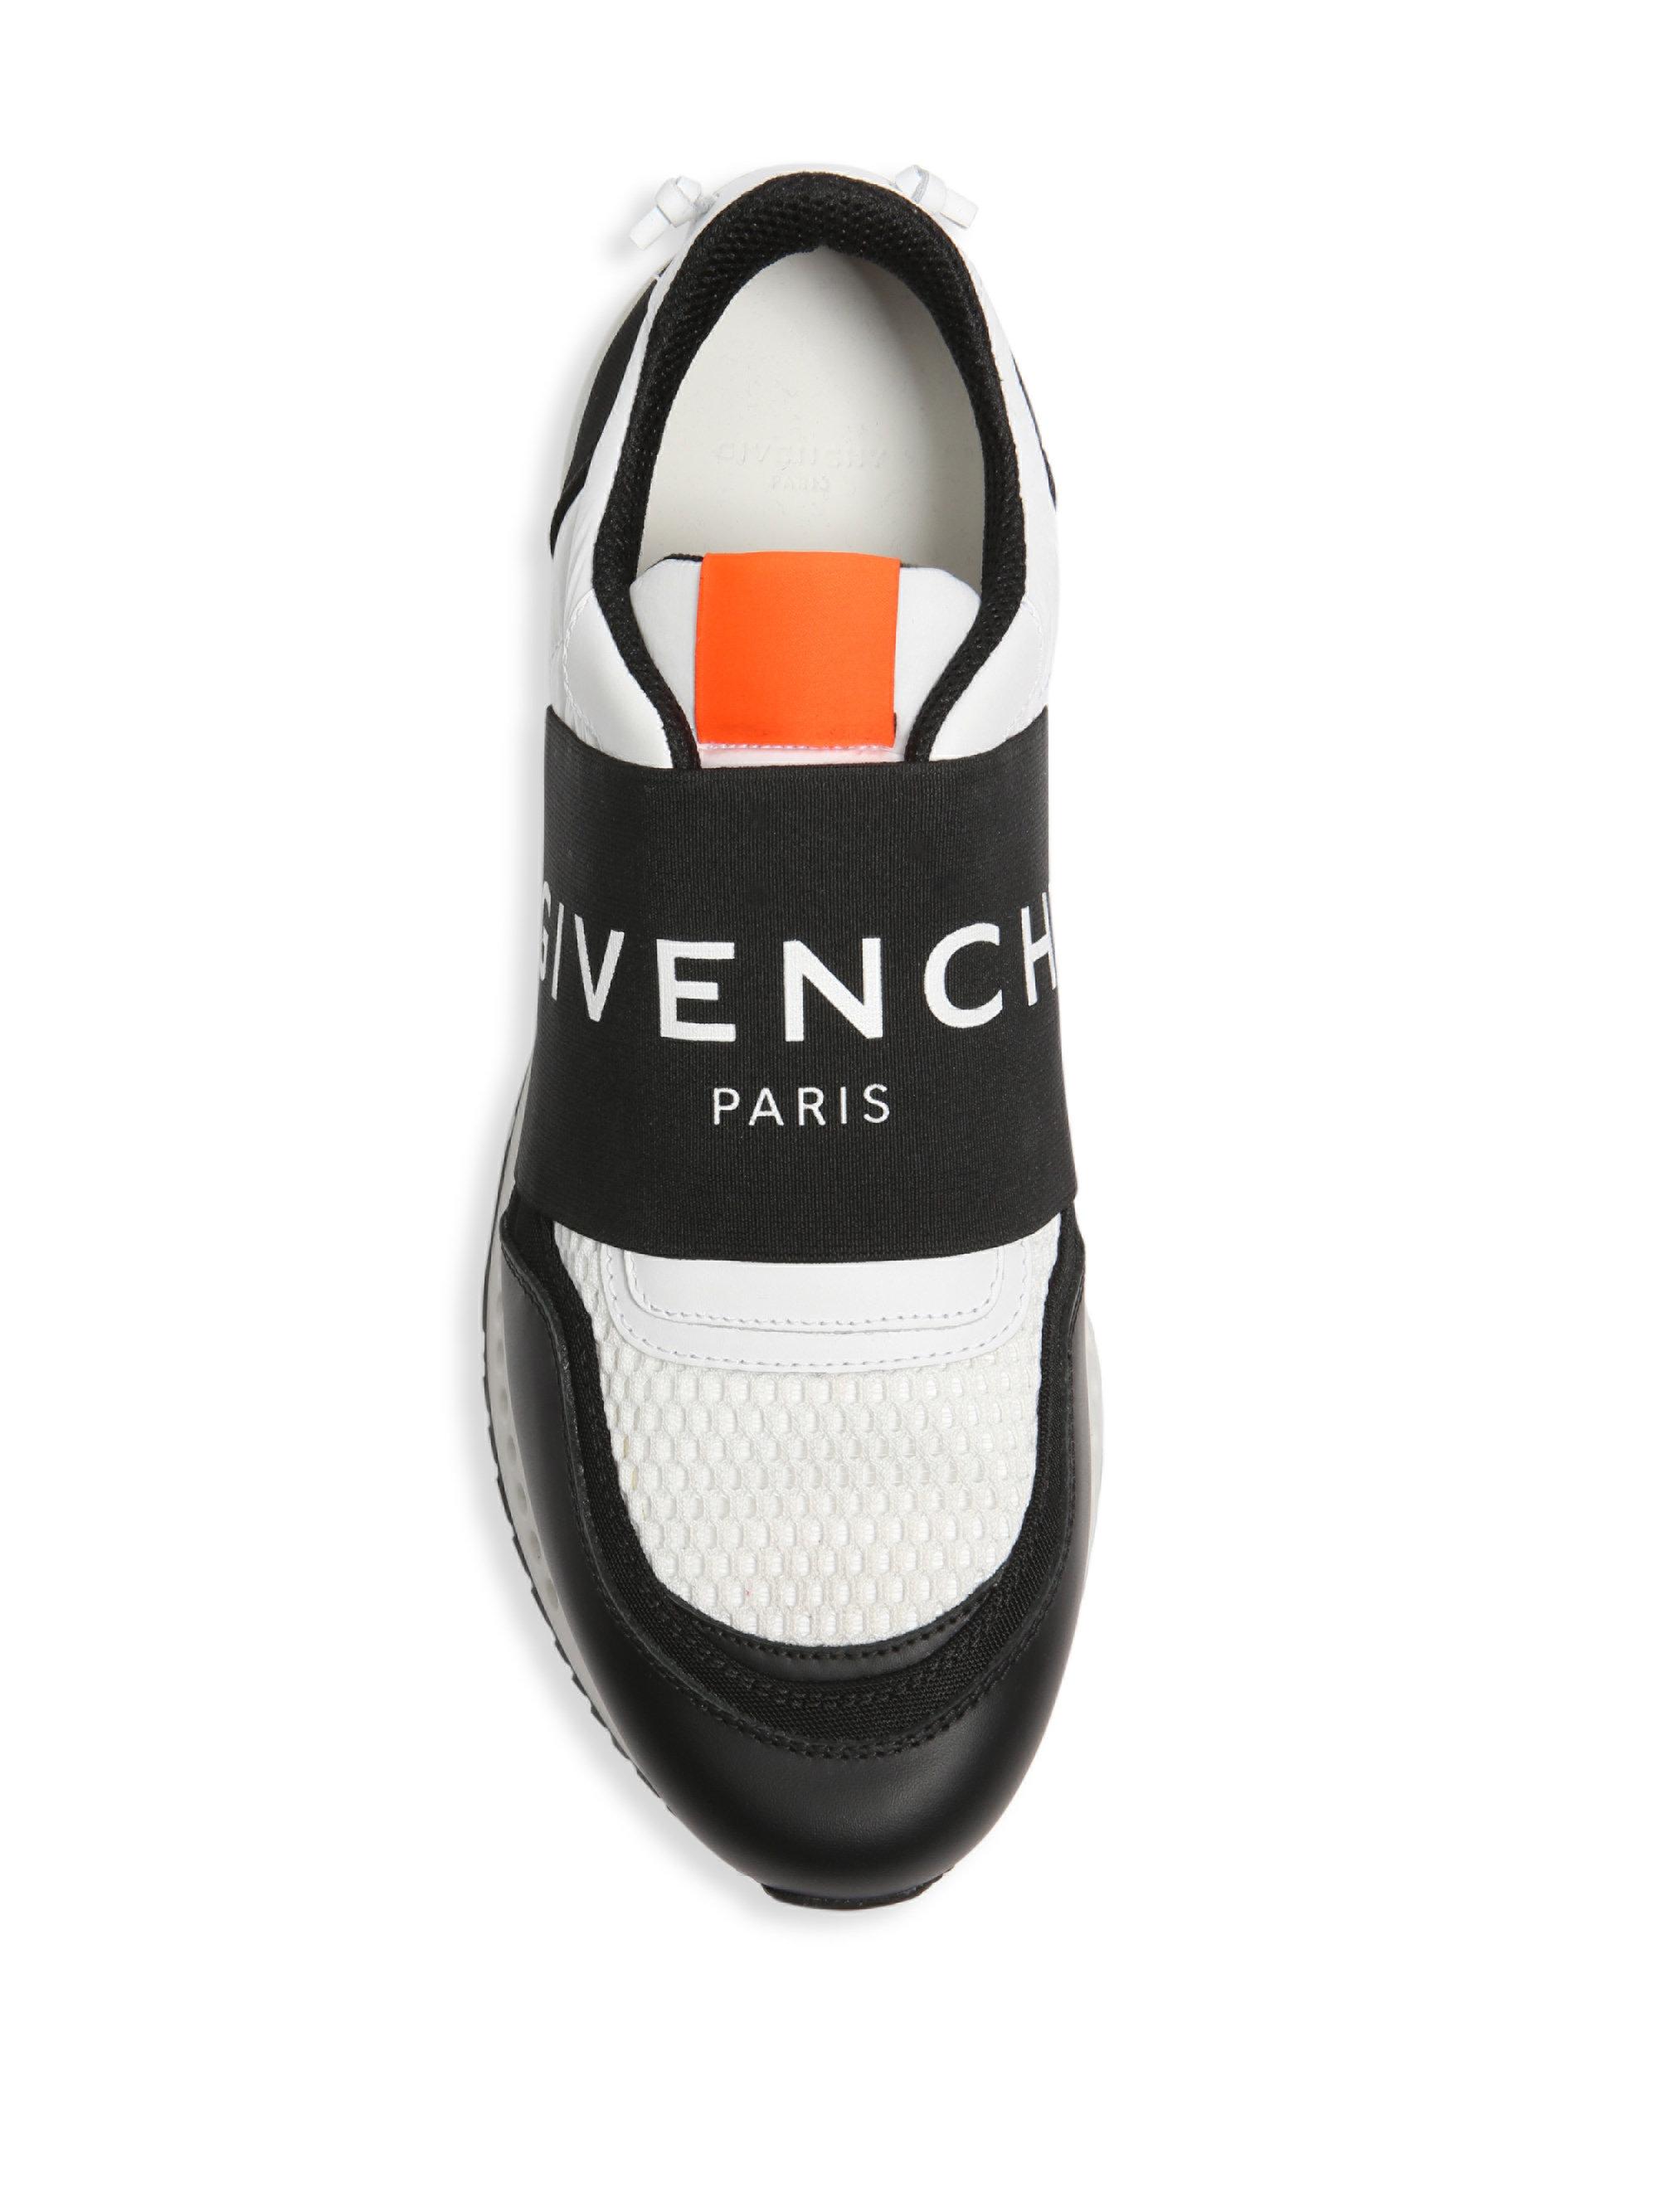 givenchy elastic logo sneakers